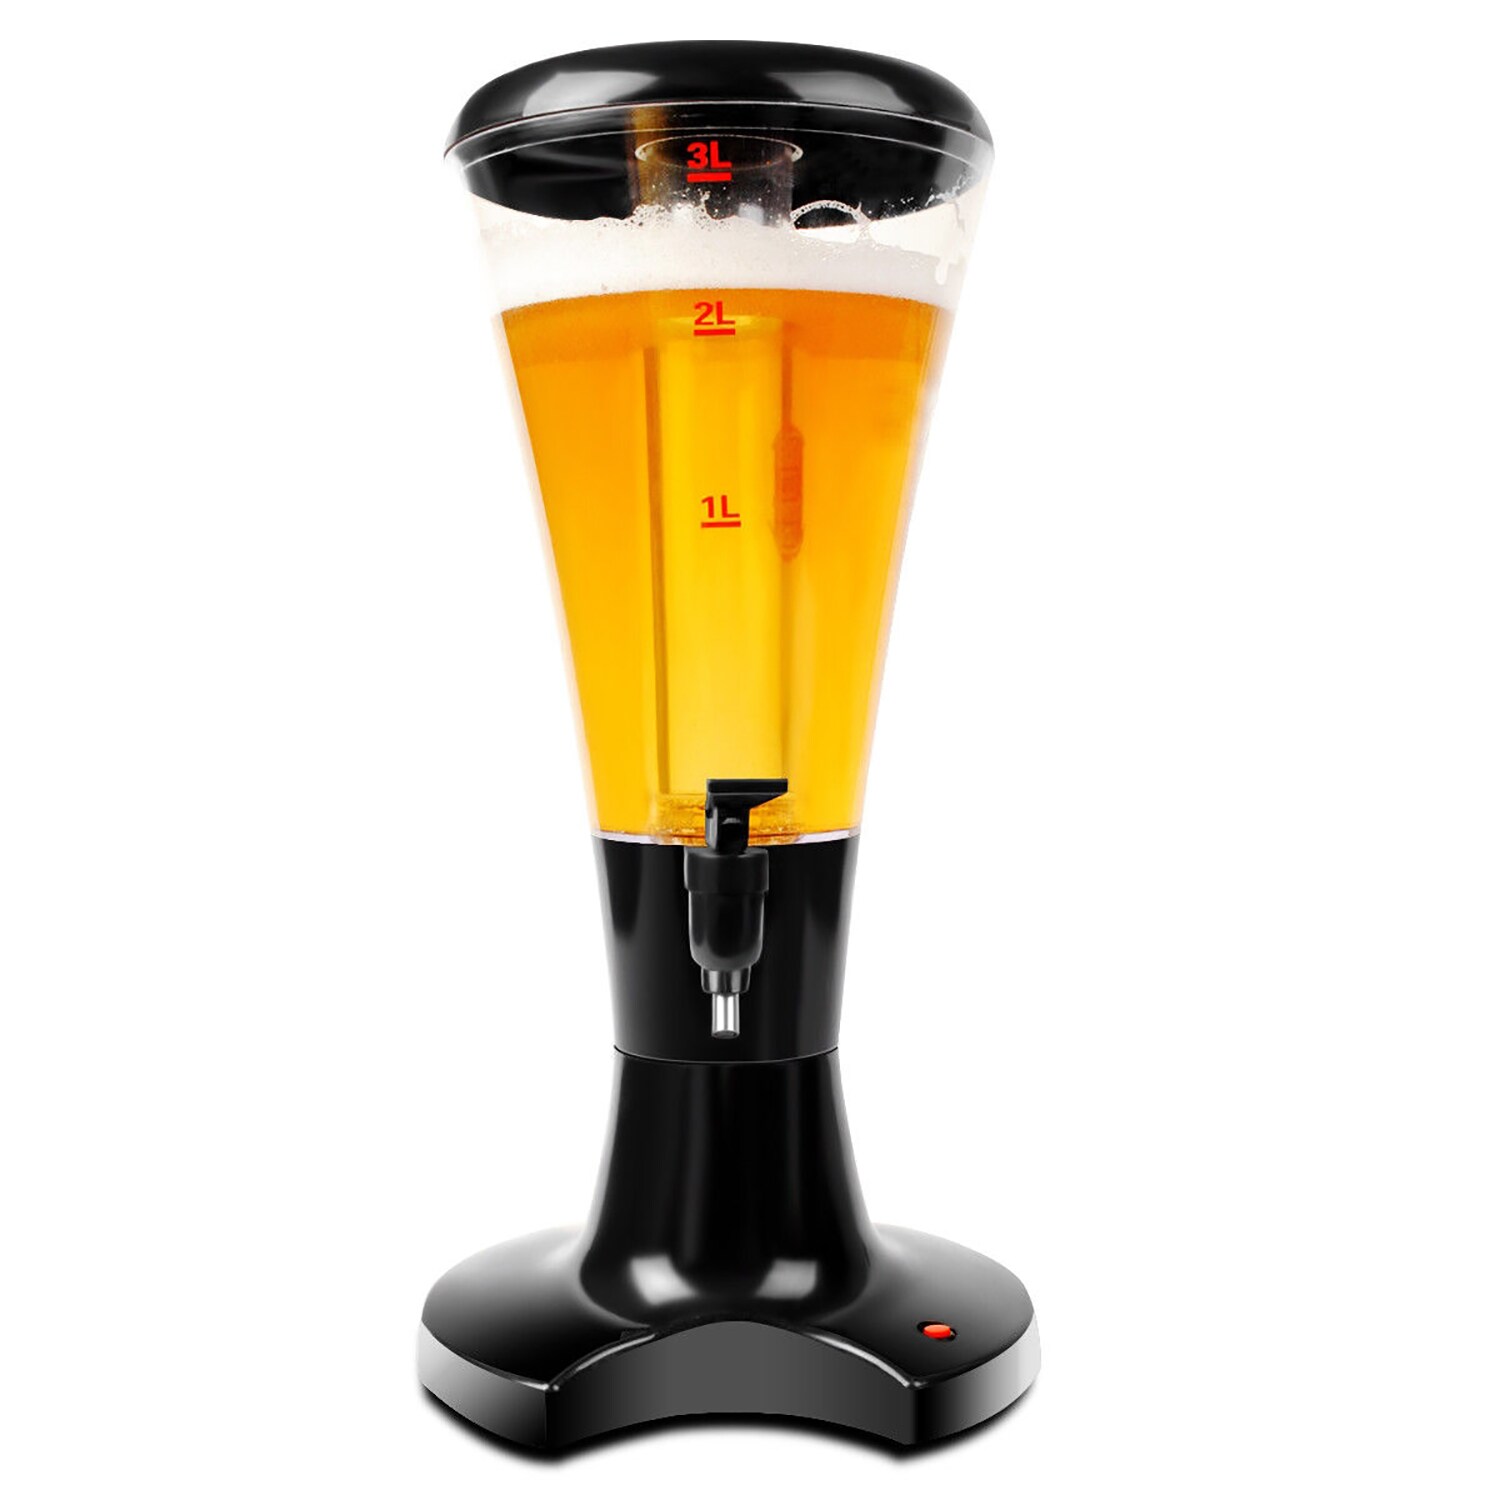 GZMR Black Poly Beverage Dispenser with Stand - 3L Capacity, Hot